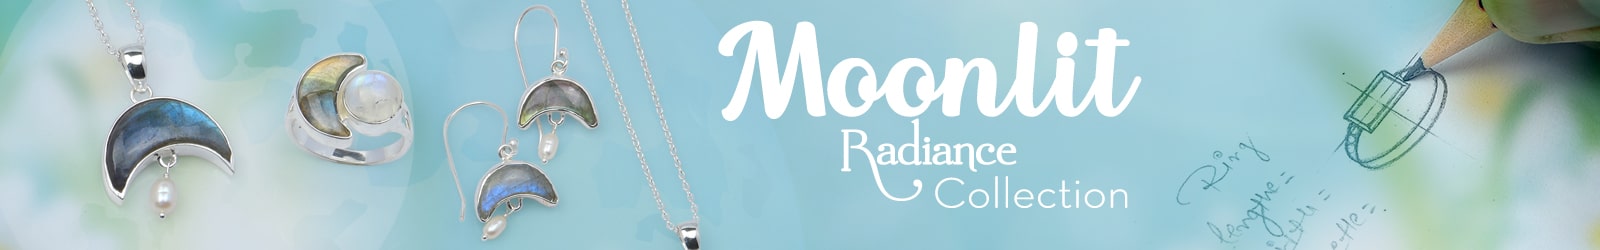 Moonlit Radiance Jewelry Collection